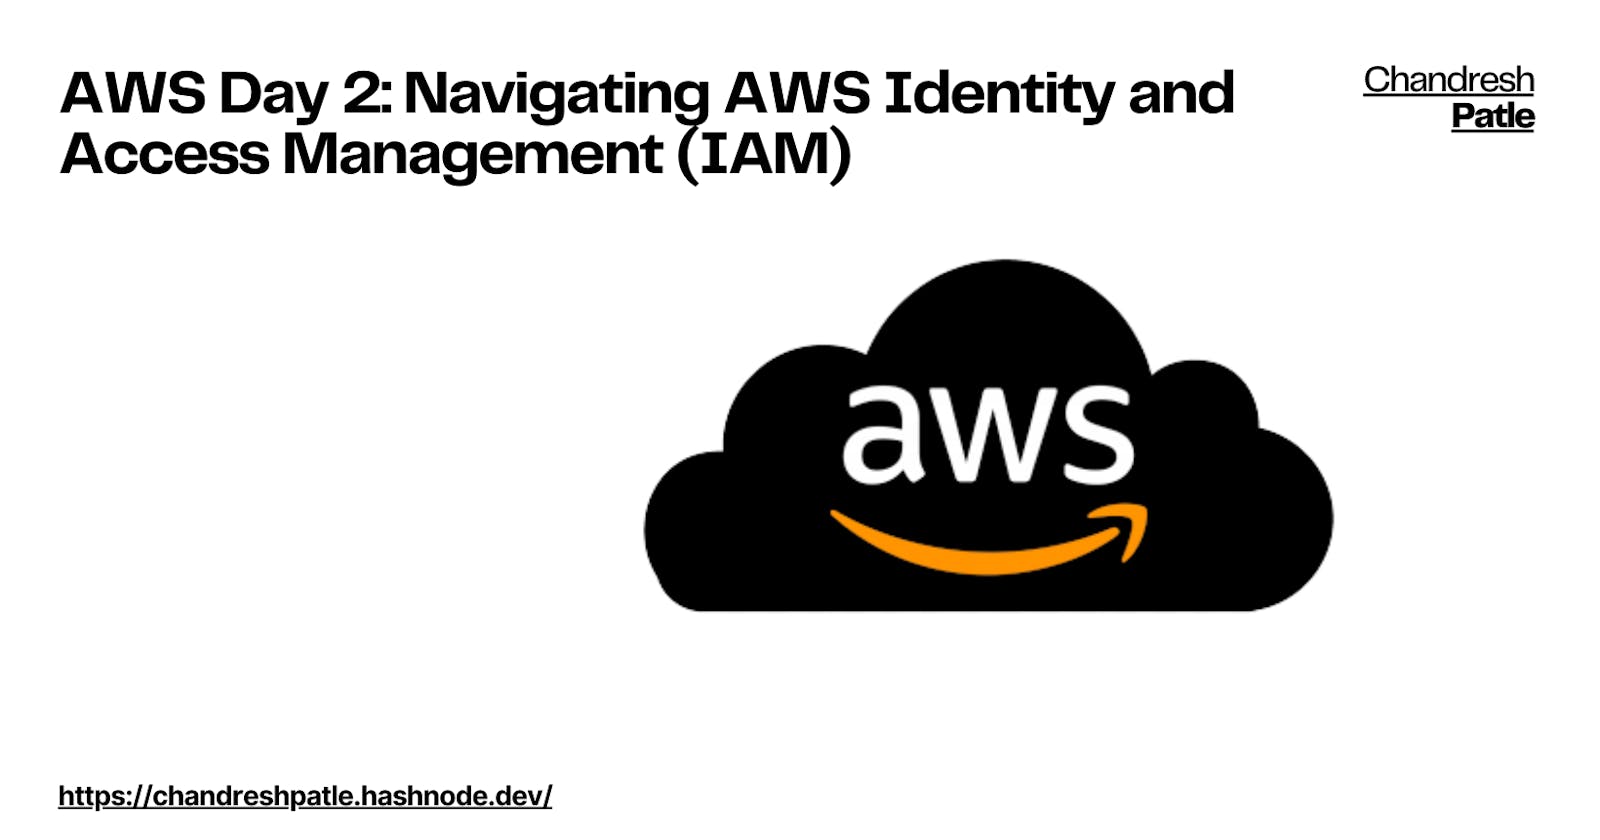 AWS Day 2: Navigating AWS Identity and Access Management (IAM)